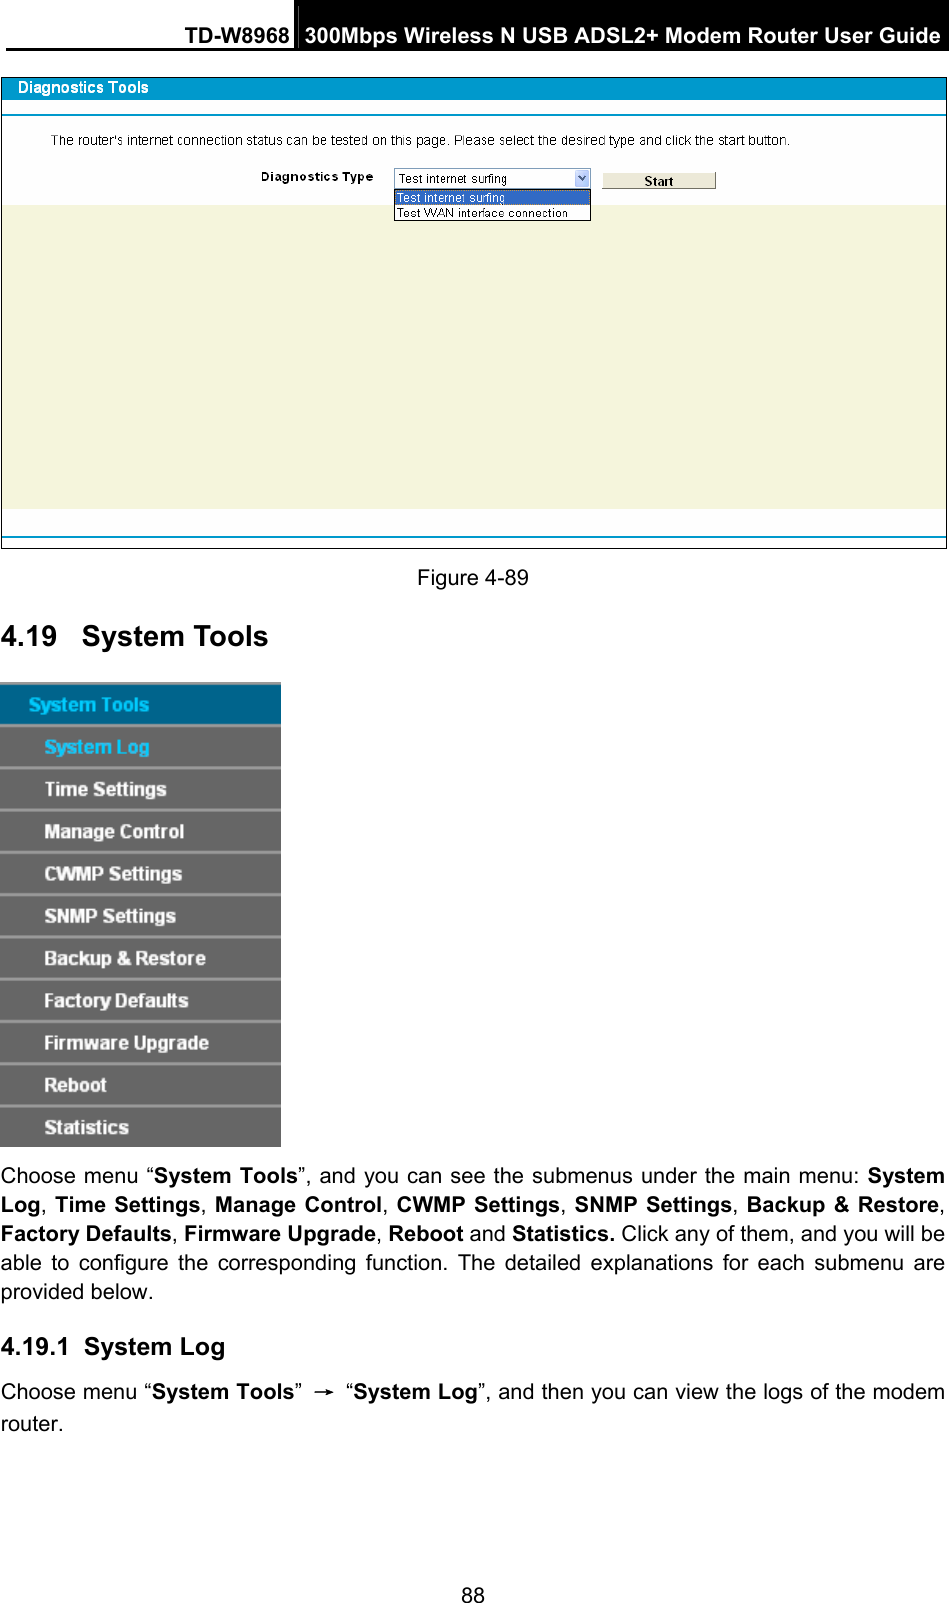 TD-W8968  300Mbps Wireless N USB ADSL2+ Modem Router User Guide 88  Figure 4-89   4.19  System Tools  Choose menu “System Tools”, and you can see the submenus under the main menu: System Log, Time Settings, Manage Control, CWMP Settings, SNMP Settings, Backup &amp; Restore, Factory Defaults, Firmware Upgrade, Reboot and Statistics. Click any of them, and you will be able to configure the corresponding function. The detailed explanations for each submenu are provided below. 4.19.1  System Log Choose menu “System Tools” → “System Log”, and then you can view the logs of the modem router. 